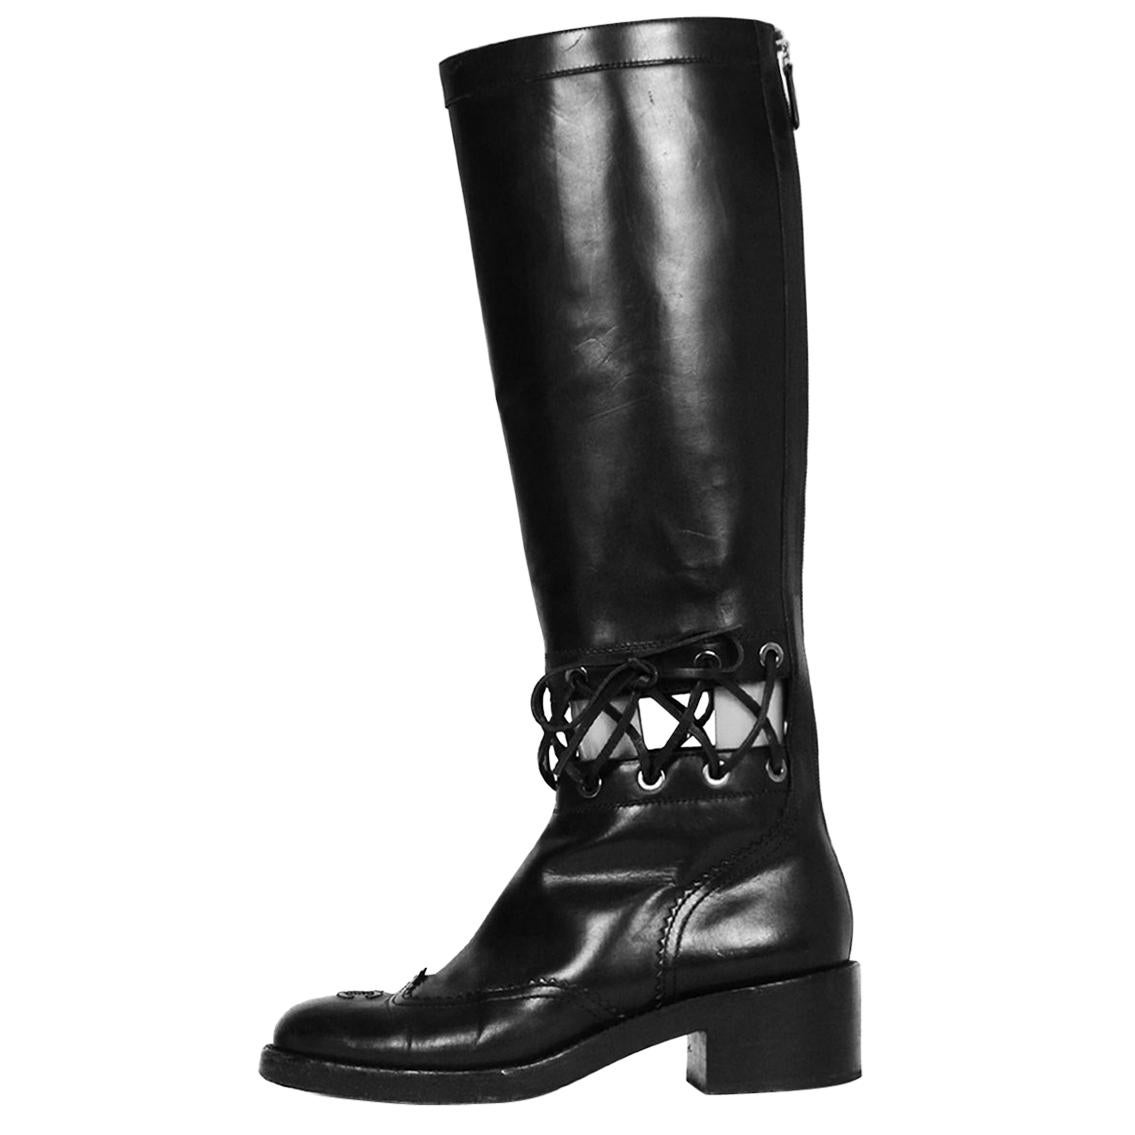 Chanel 2016 Lace-Up Cutout CC Knee-High Boots sz 38.5